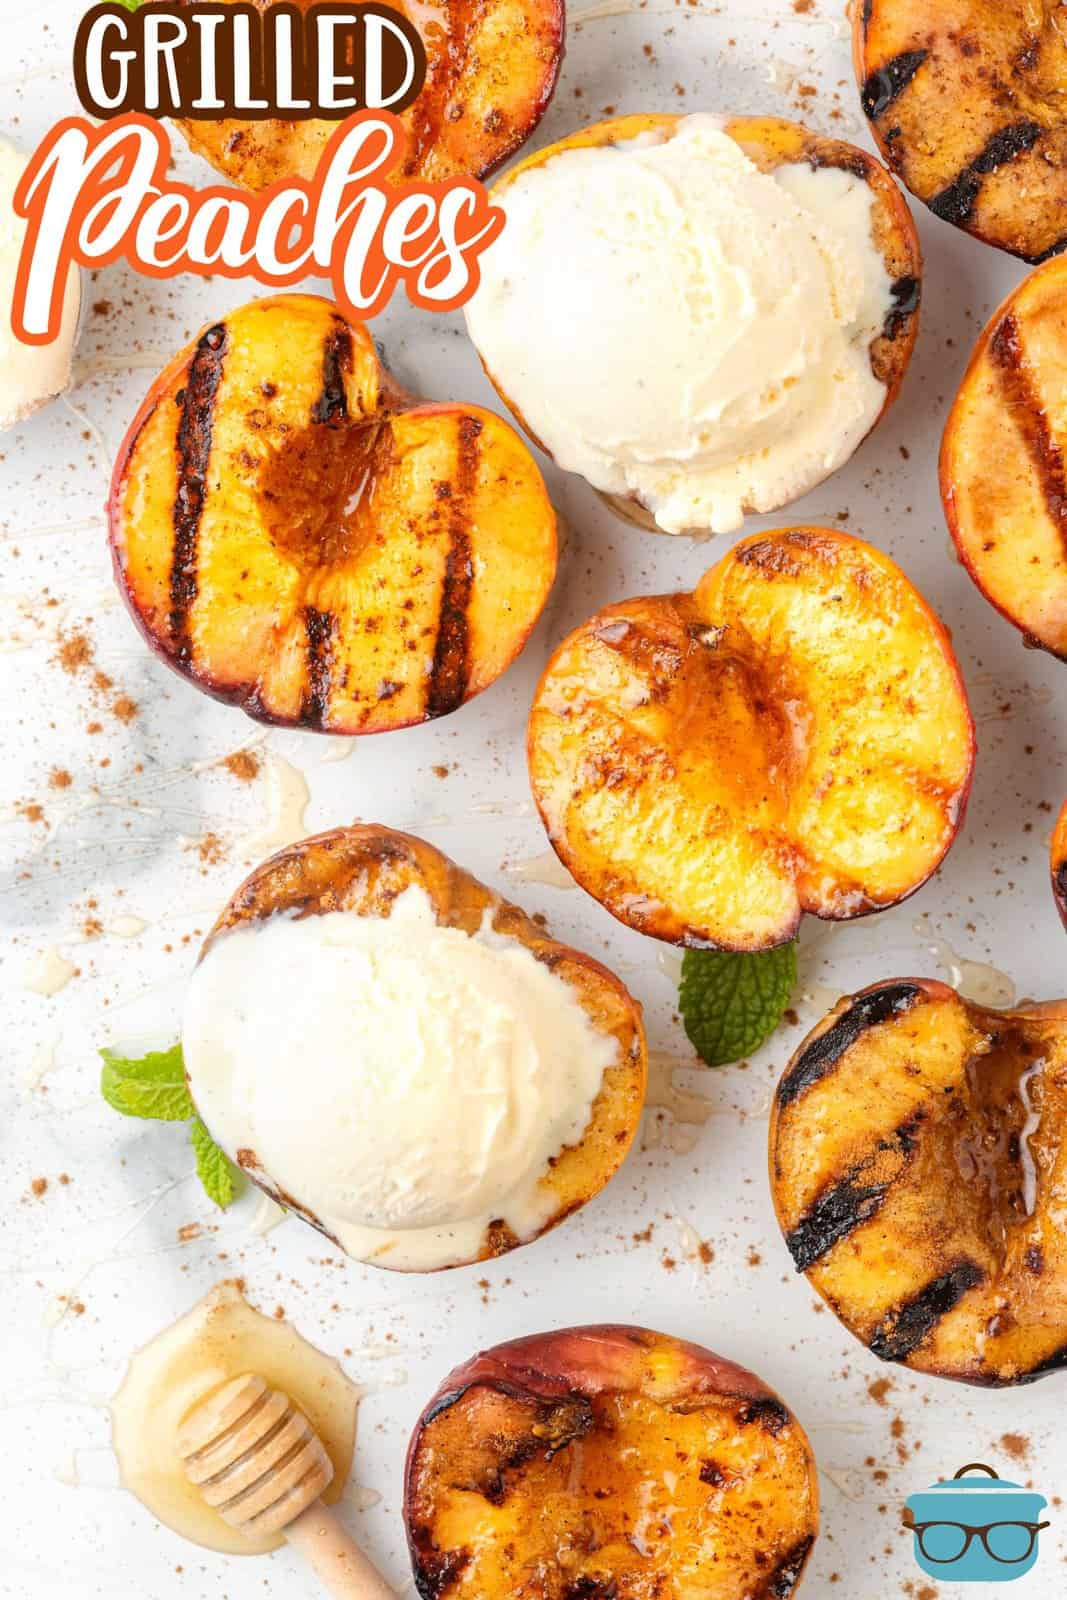 Pinterest image overhead of Grilled Peaches with some with a scoop of ice cream.